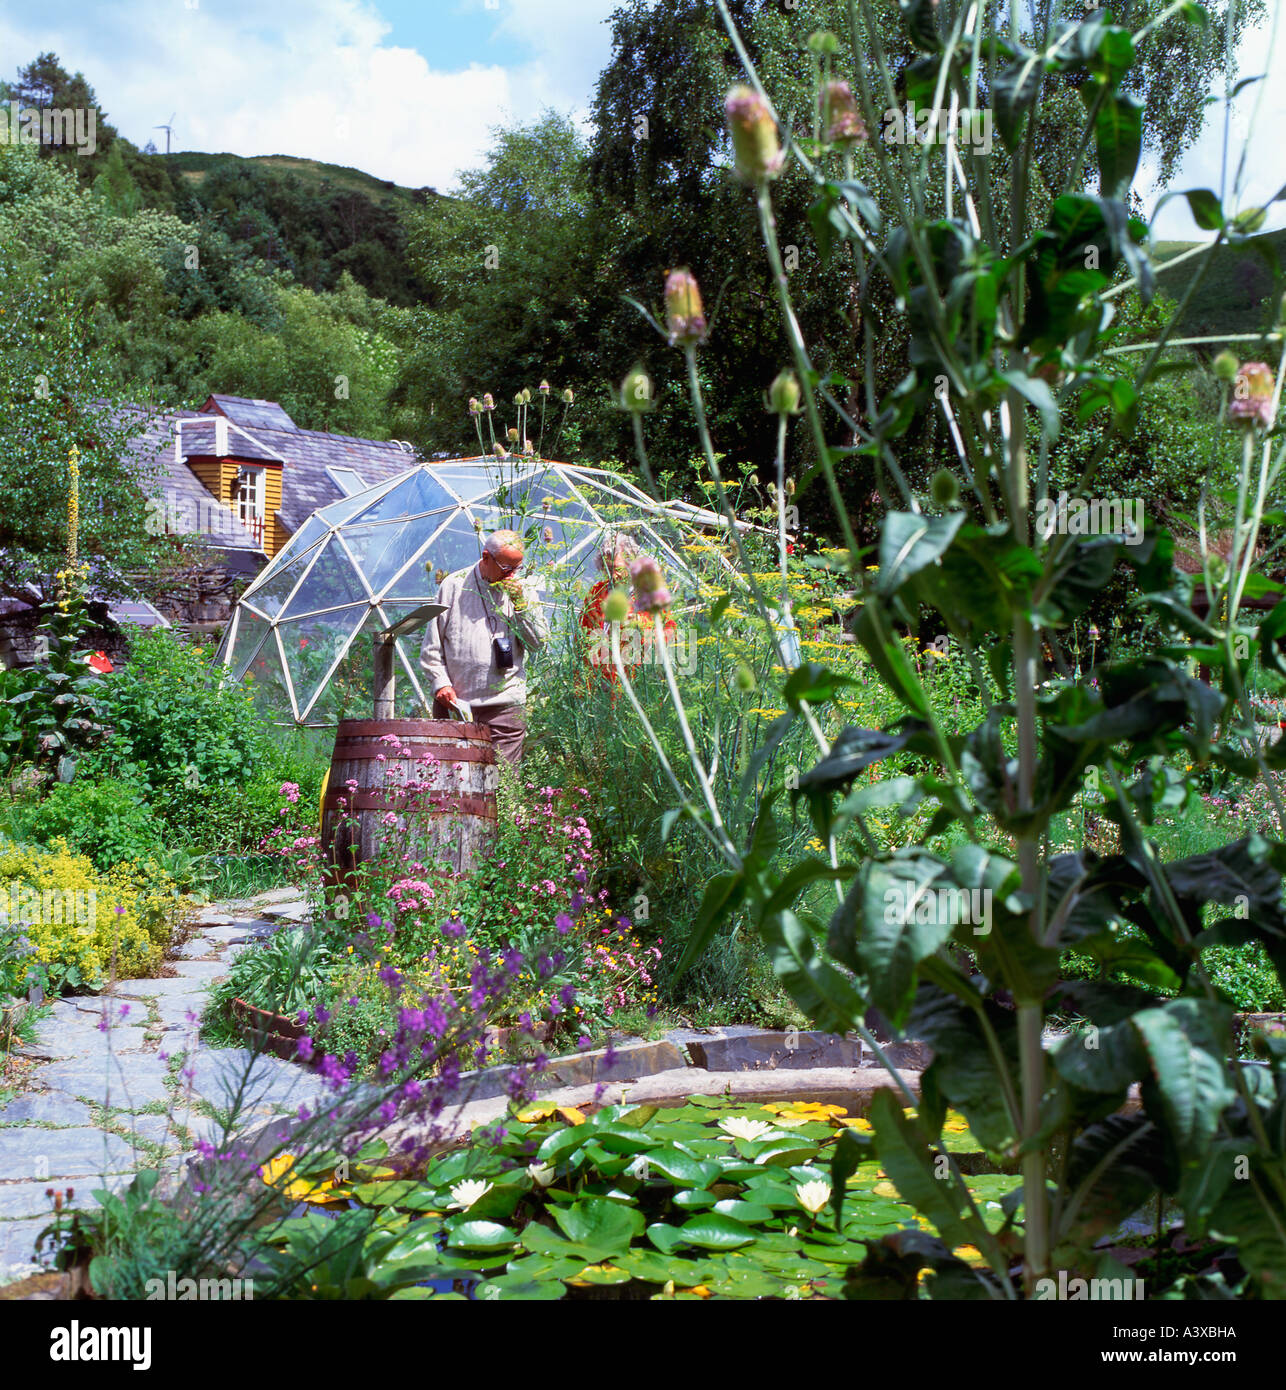 Visitors sniffing plants in the herb garden at the Centre for Alternative Technology Machynlleth Powys Wales UK KATHY DEWITT Stock Photo